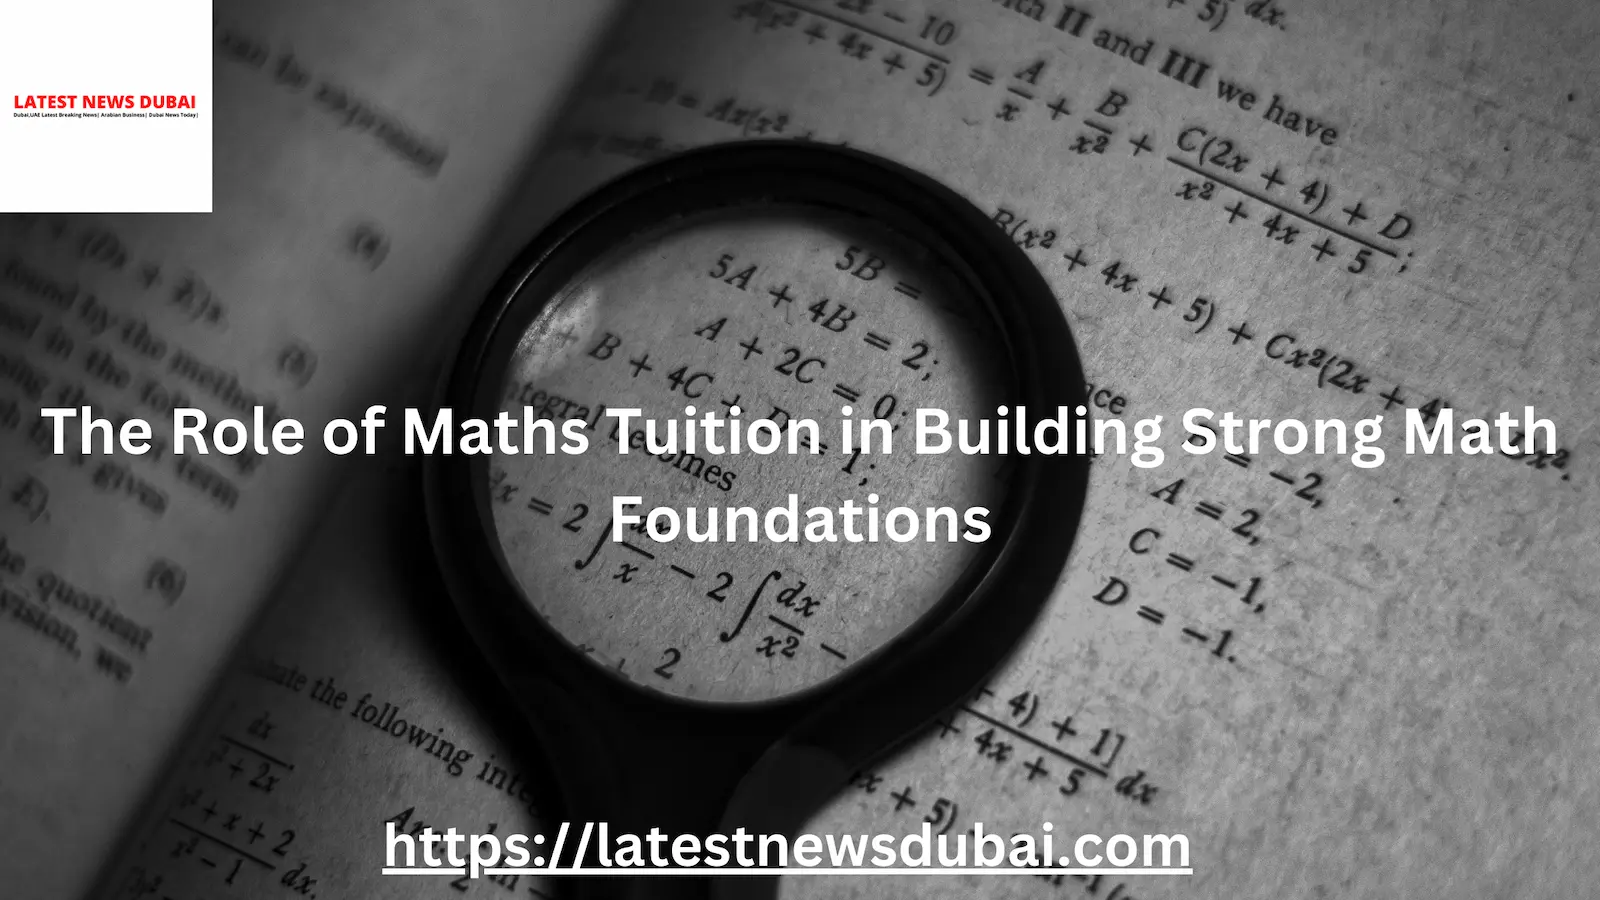 The Role of Maths Tuition in Building Strong Math Foundations